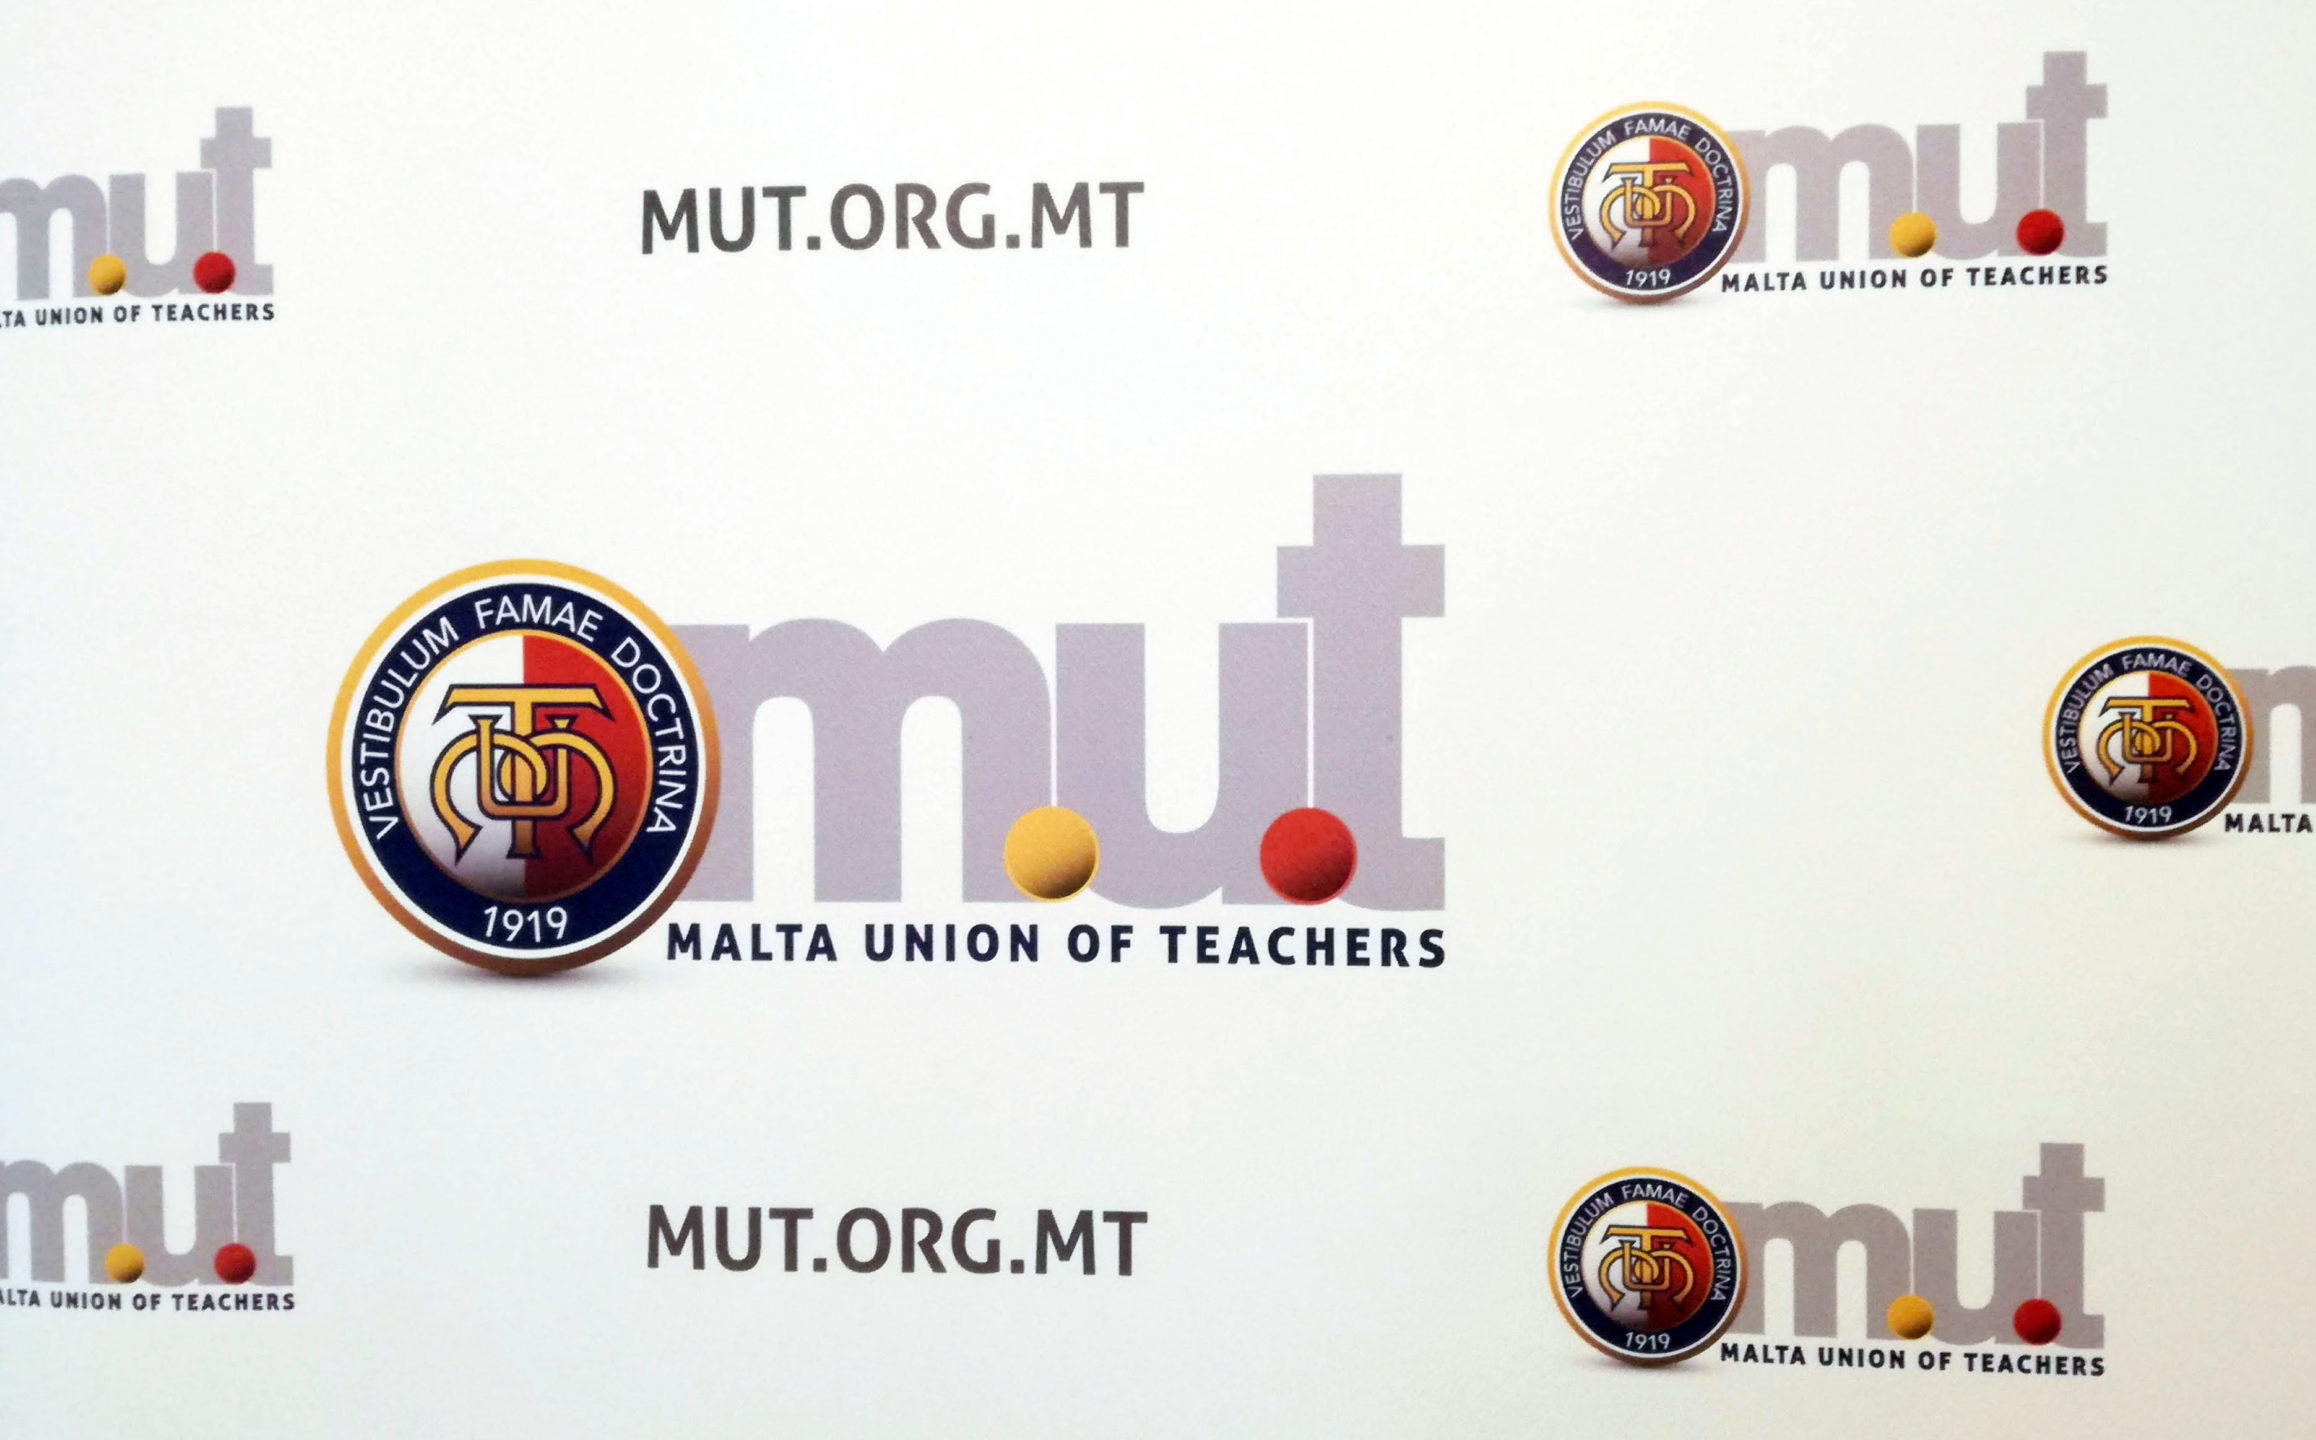 MUT condemns incident involving contaminated beverage and supports the educator involved